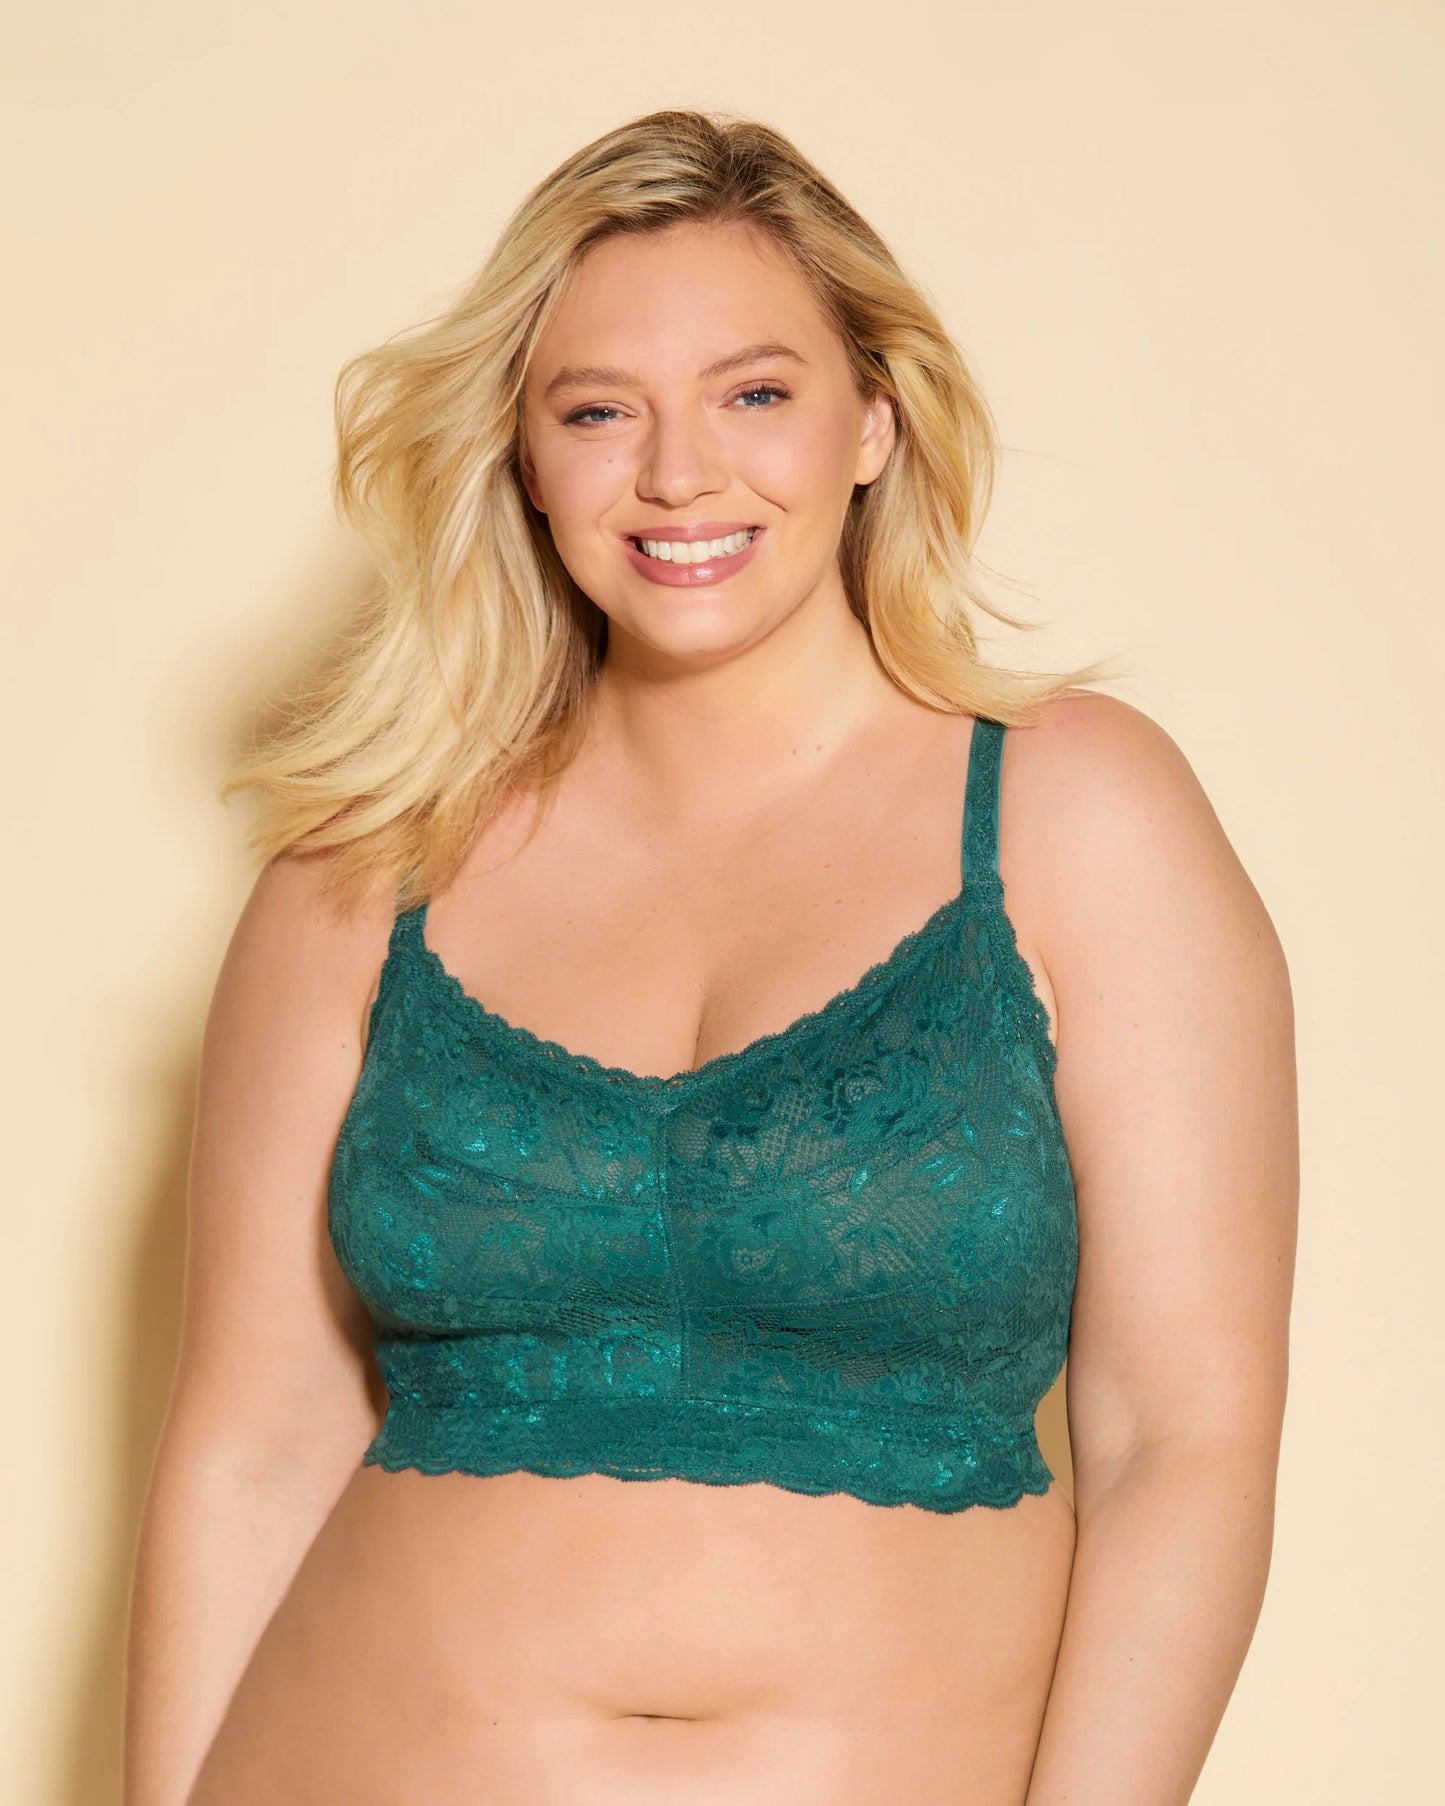 Cosabella Never Say Never Ultra Curvy Sweetie Bralette